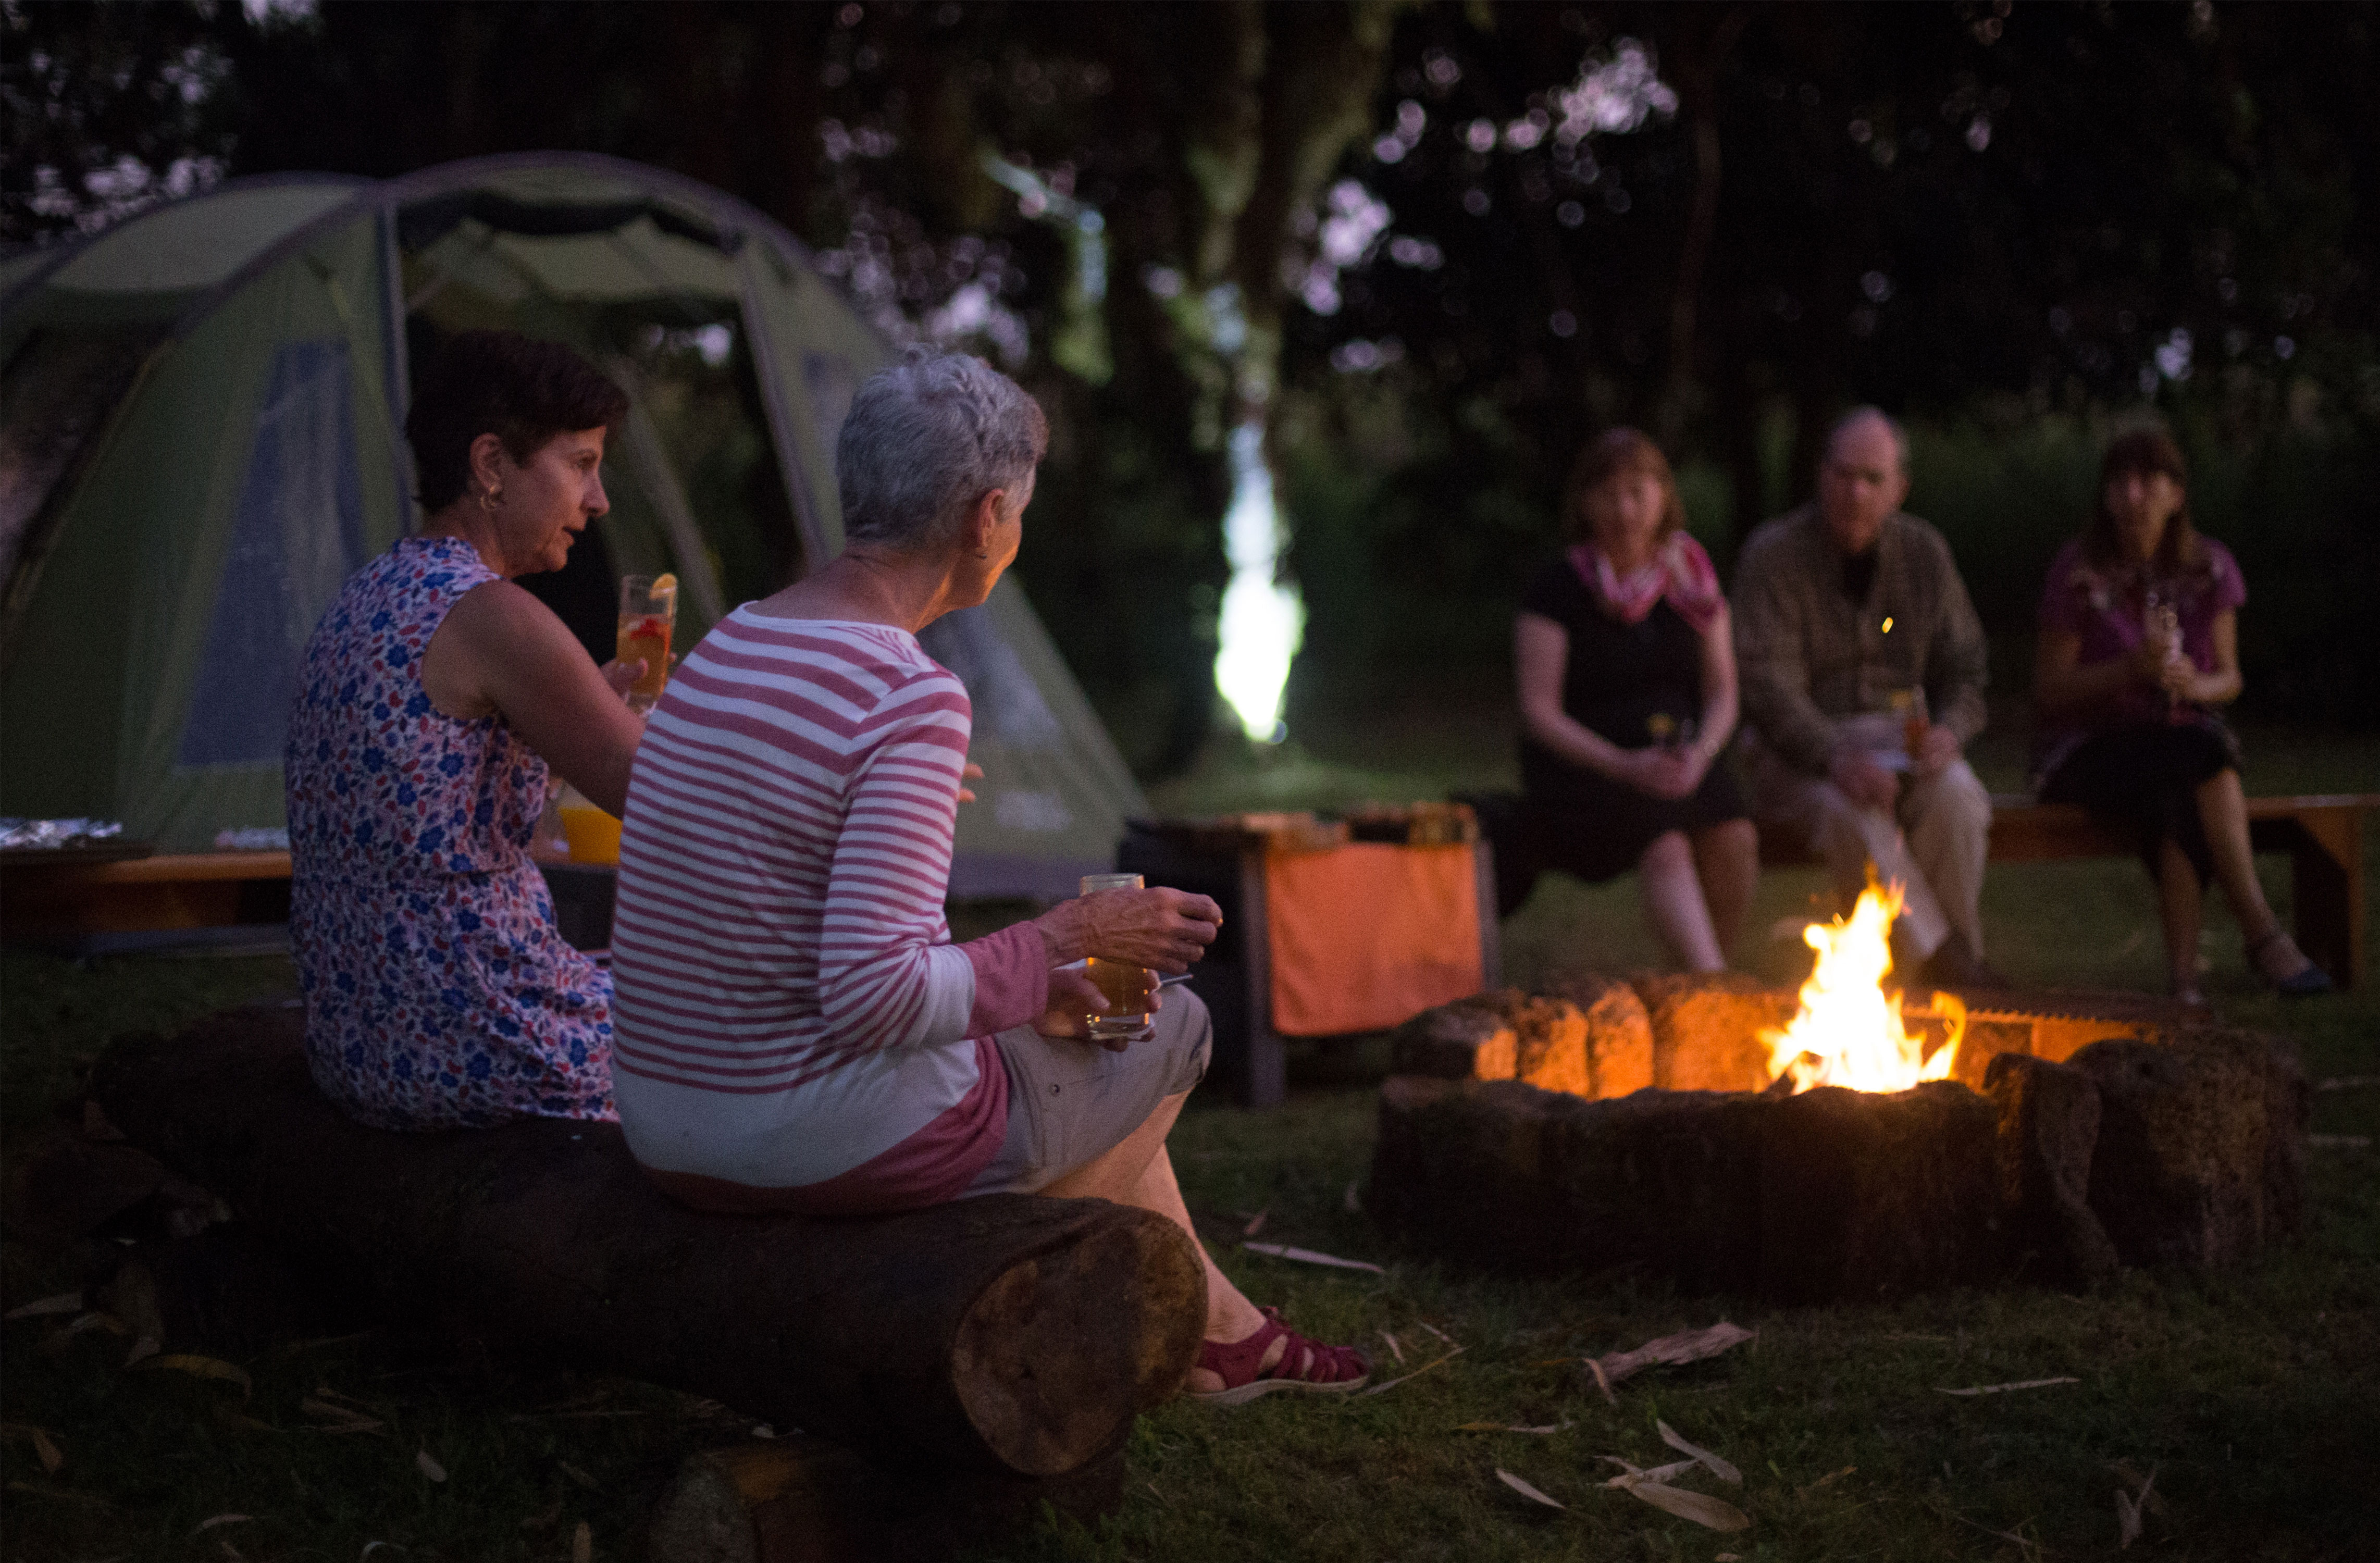 Guests gathered around a fire pit